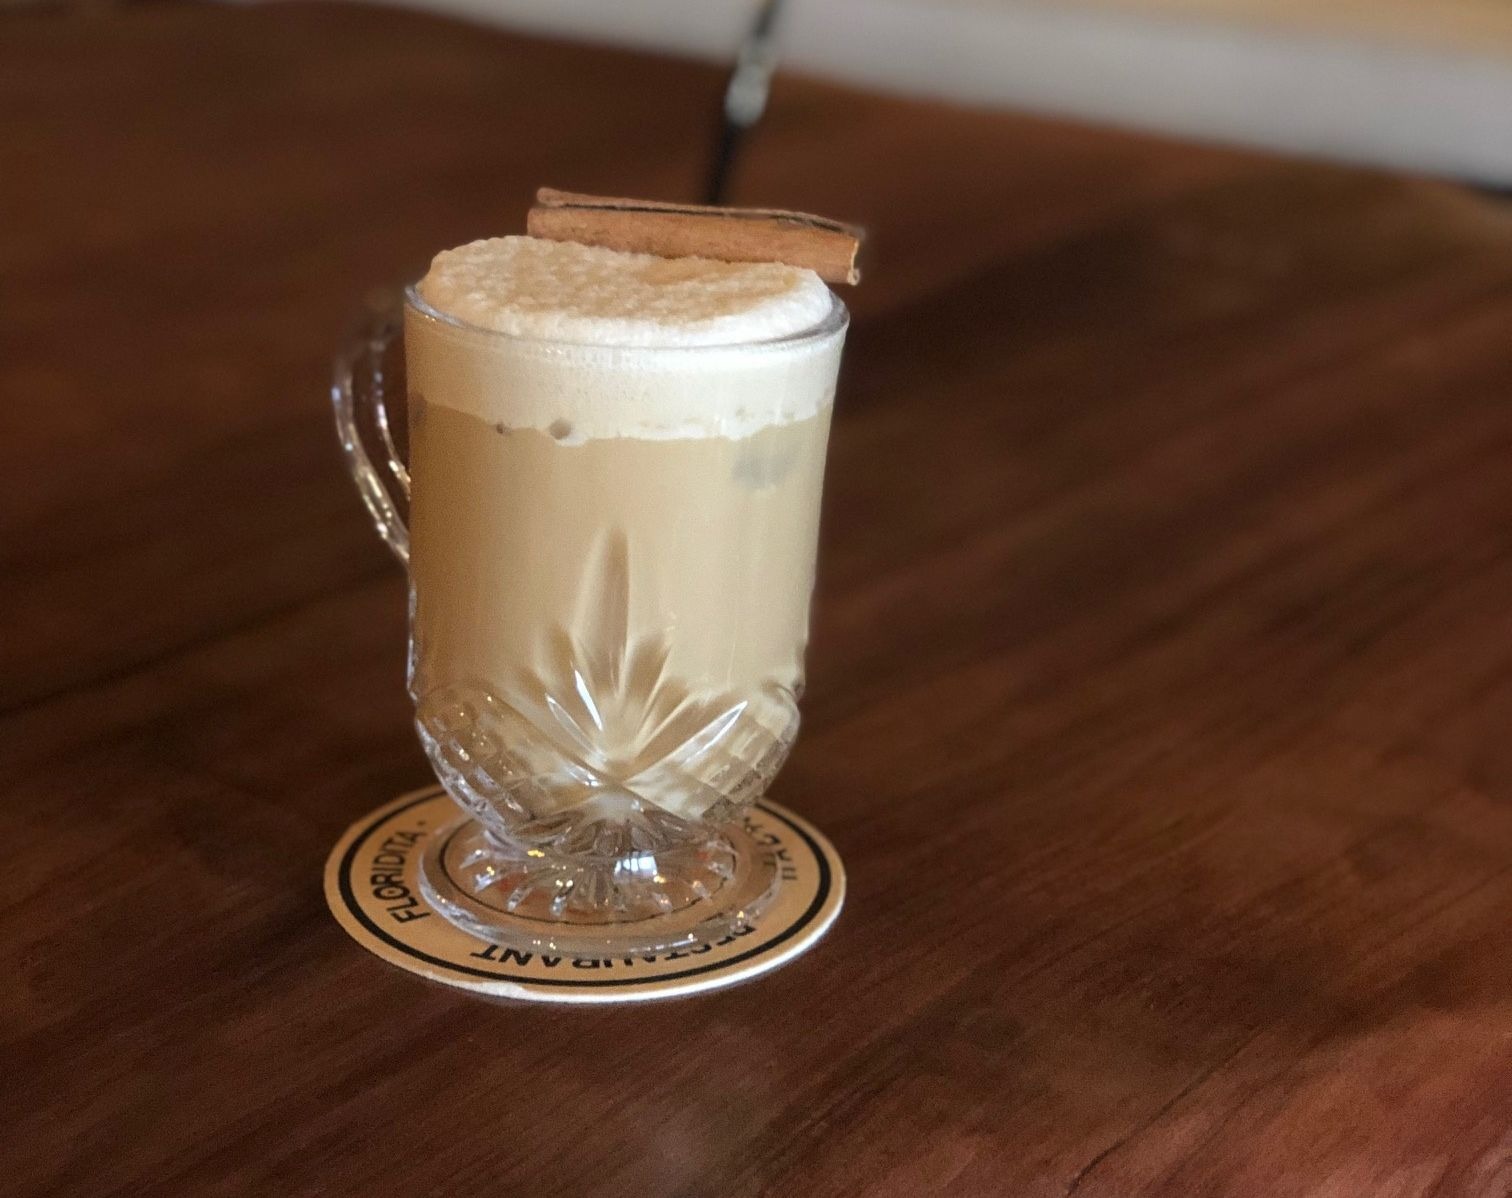 Eater Boston - March 18 2019 - Coffee ChaChaCha